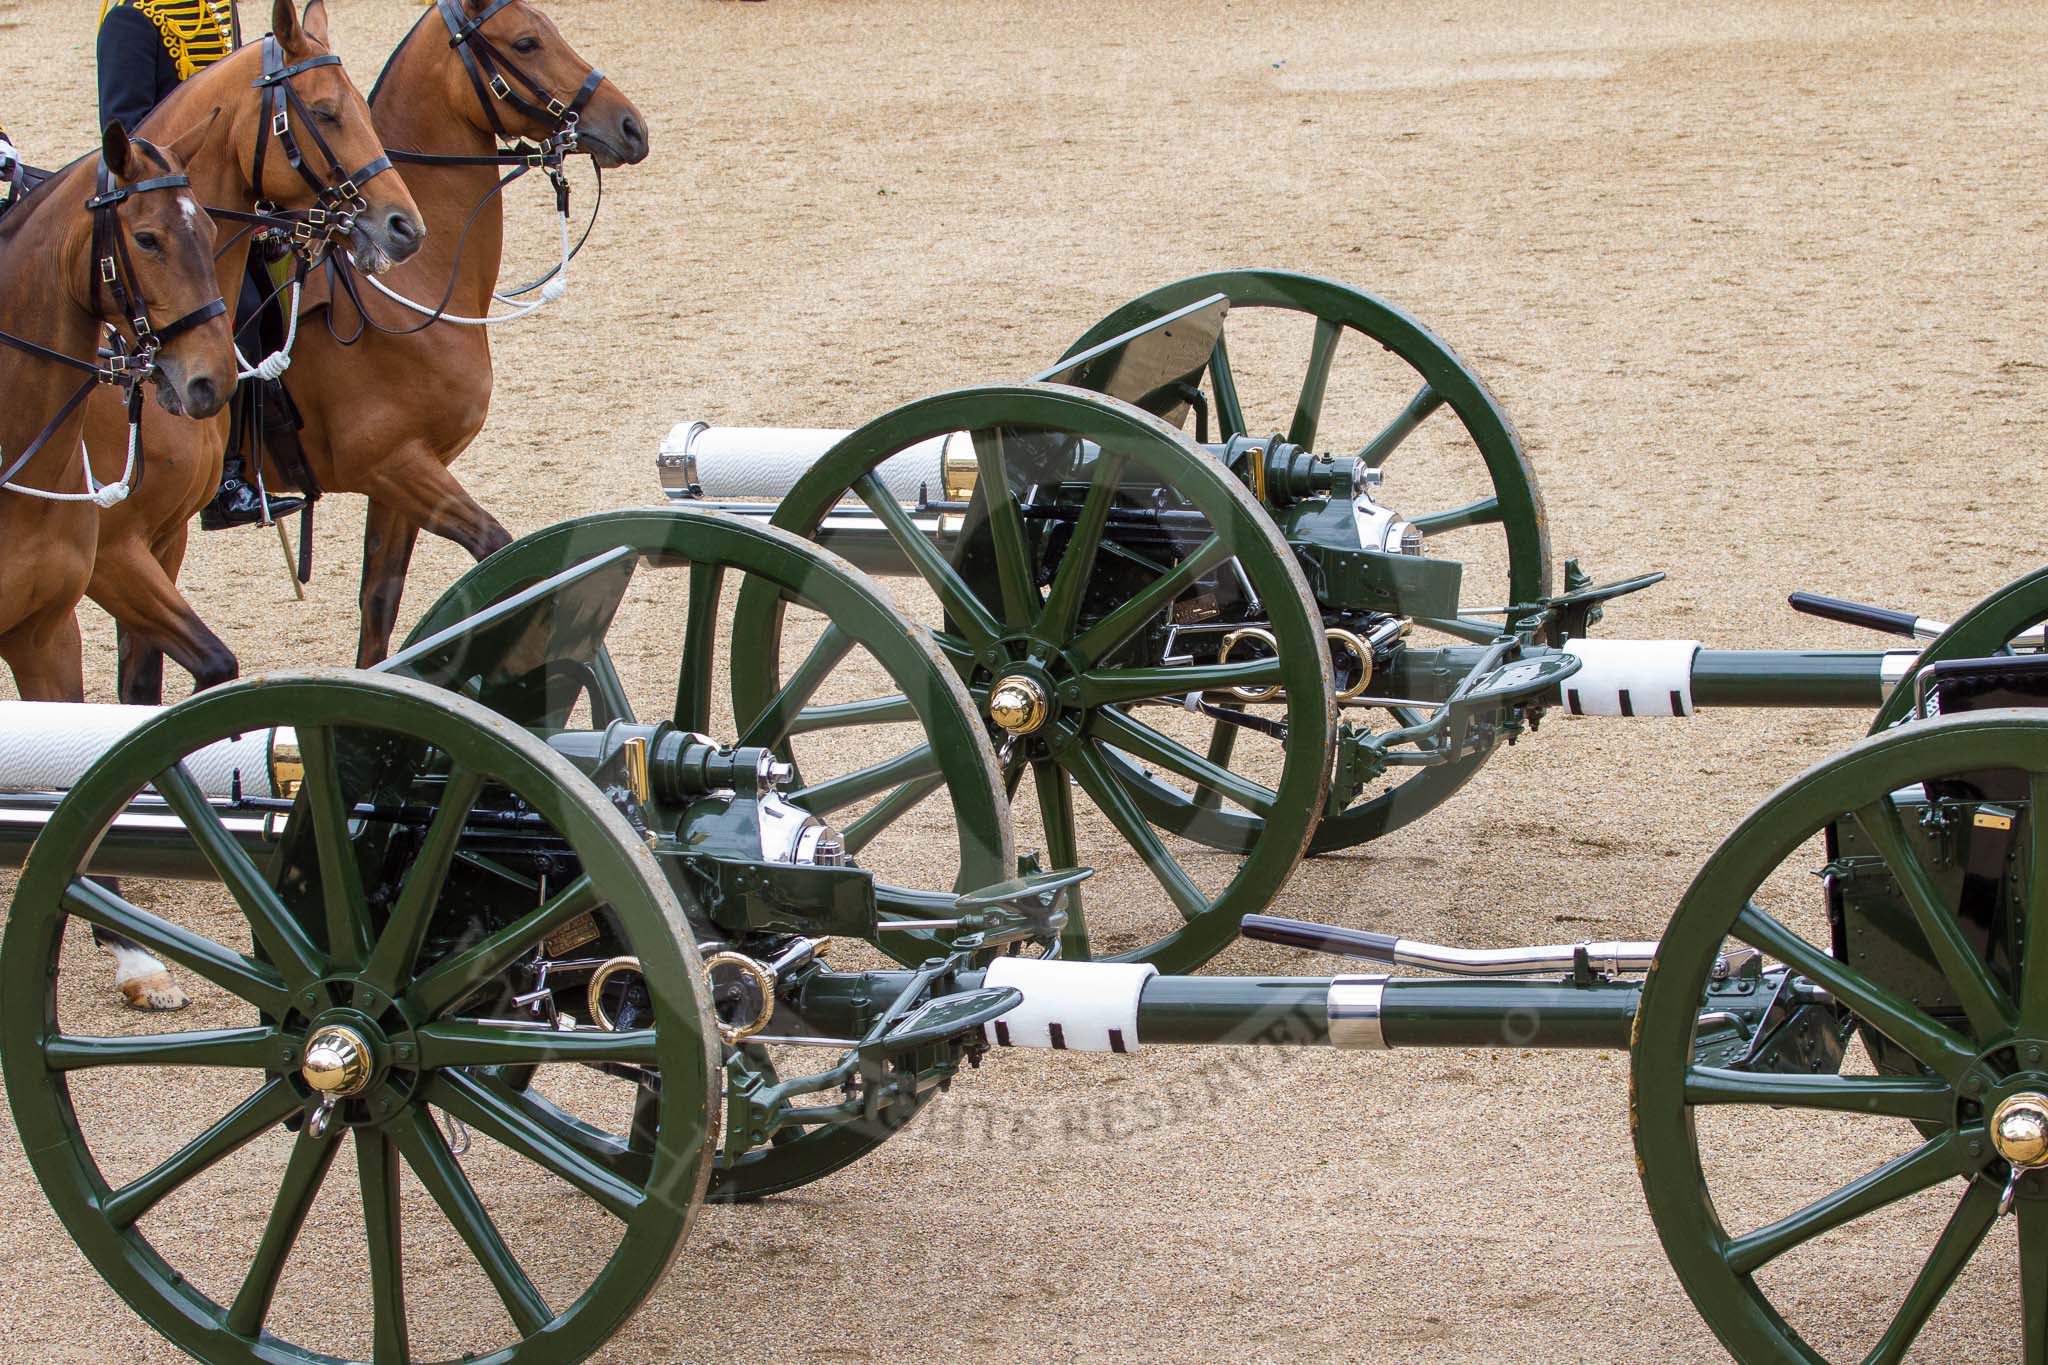 The Colonel's Review 2012: A pair of the 13-pounder guns used by the Royal Horse Artillery..
Horse Guards Parade, Westminster,
London SW1,

United Kingdom,
on 09 June 2012 at 11:52, image #404